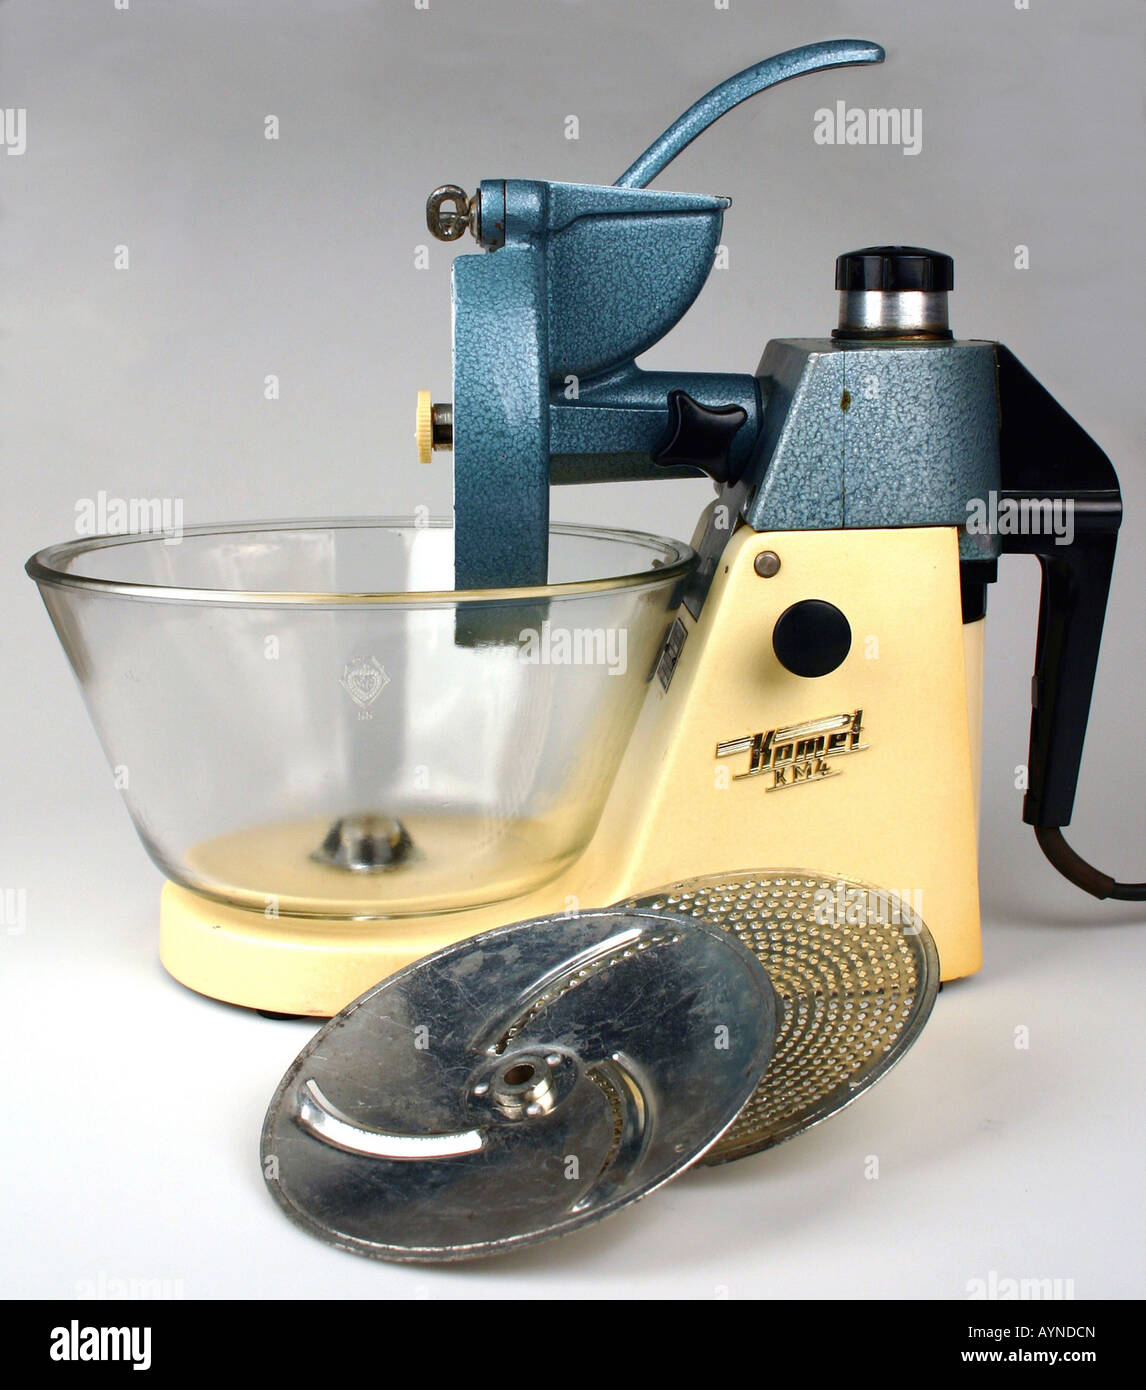 household, kitchen and kitchenware, electric kitchen machine Komet 4,  produced by VEB Elektrogeraetewerk Suhl, GDR, 1958, historic, historical,  East Germany, DDR, 20th century, product, studio shot, factory design,  1950s, 50s, kitchen tool,